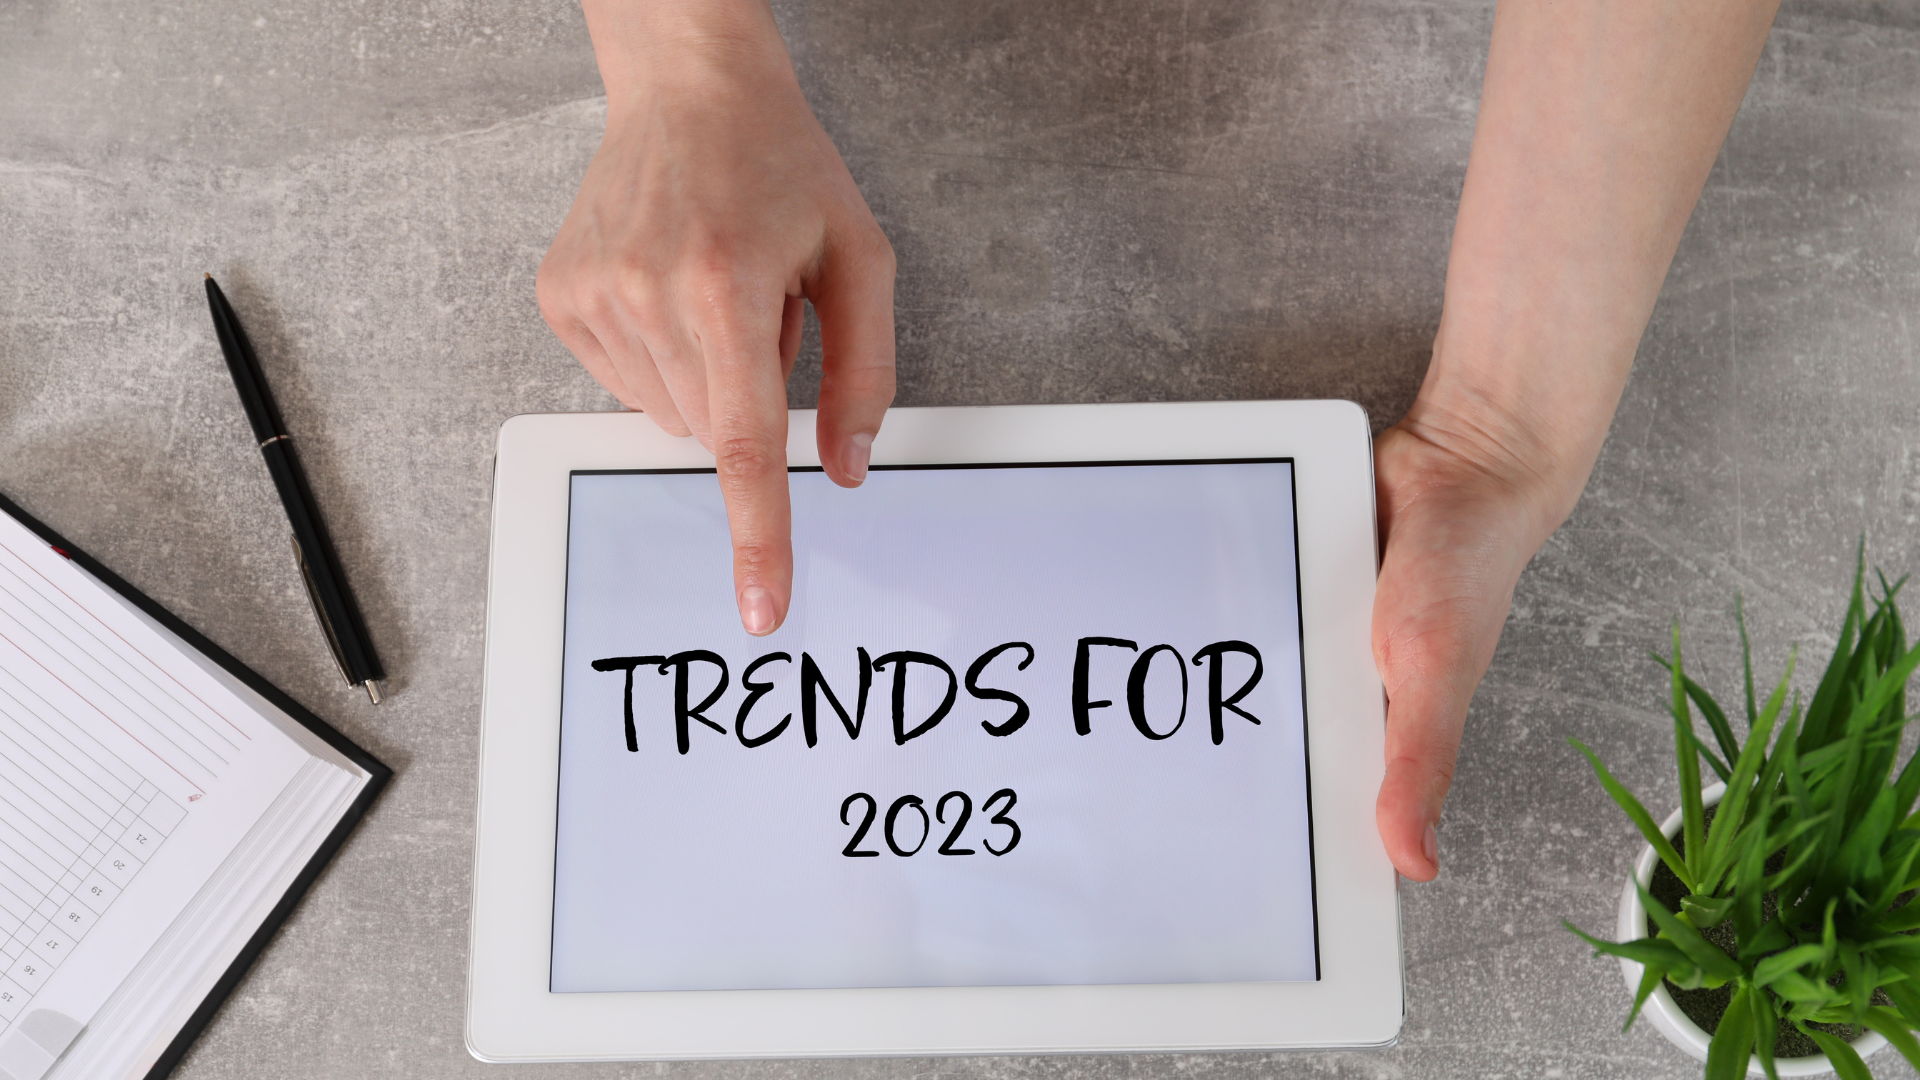 DIGITAL MARKETING AGENCY: EVERYTHING YOU NEED TO KNOW IN 2023